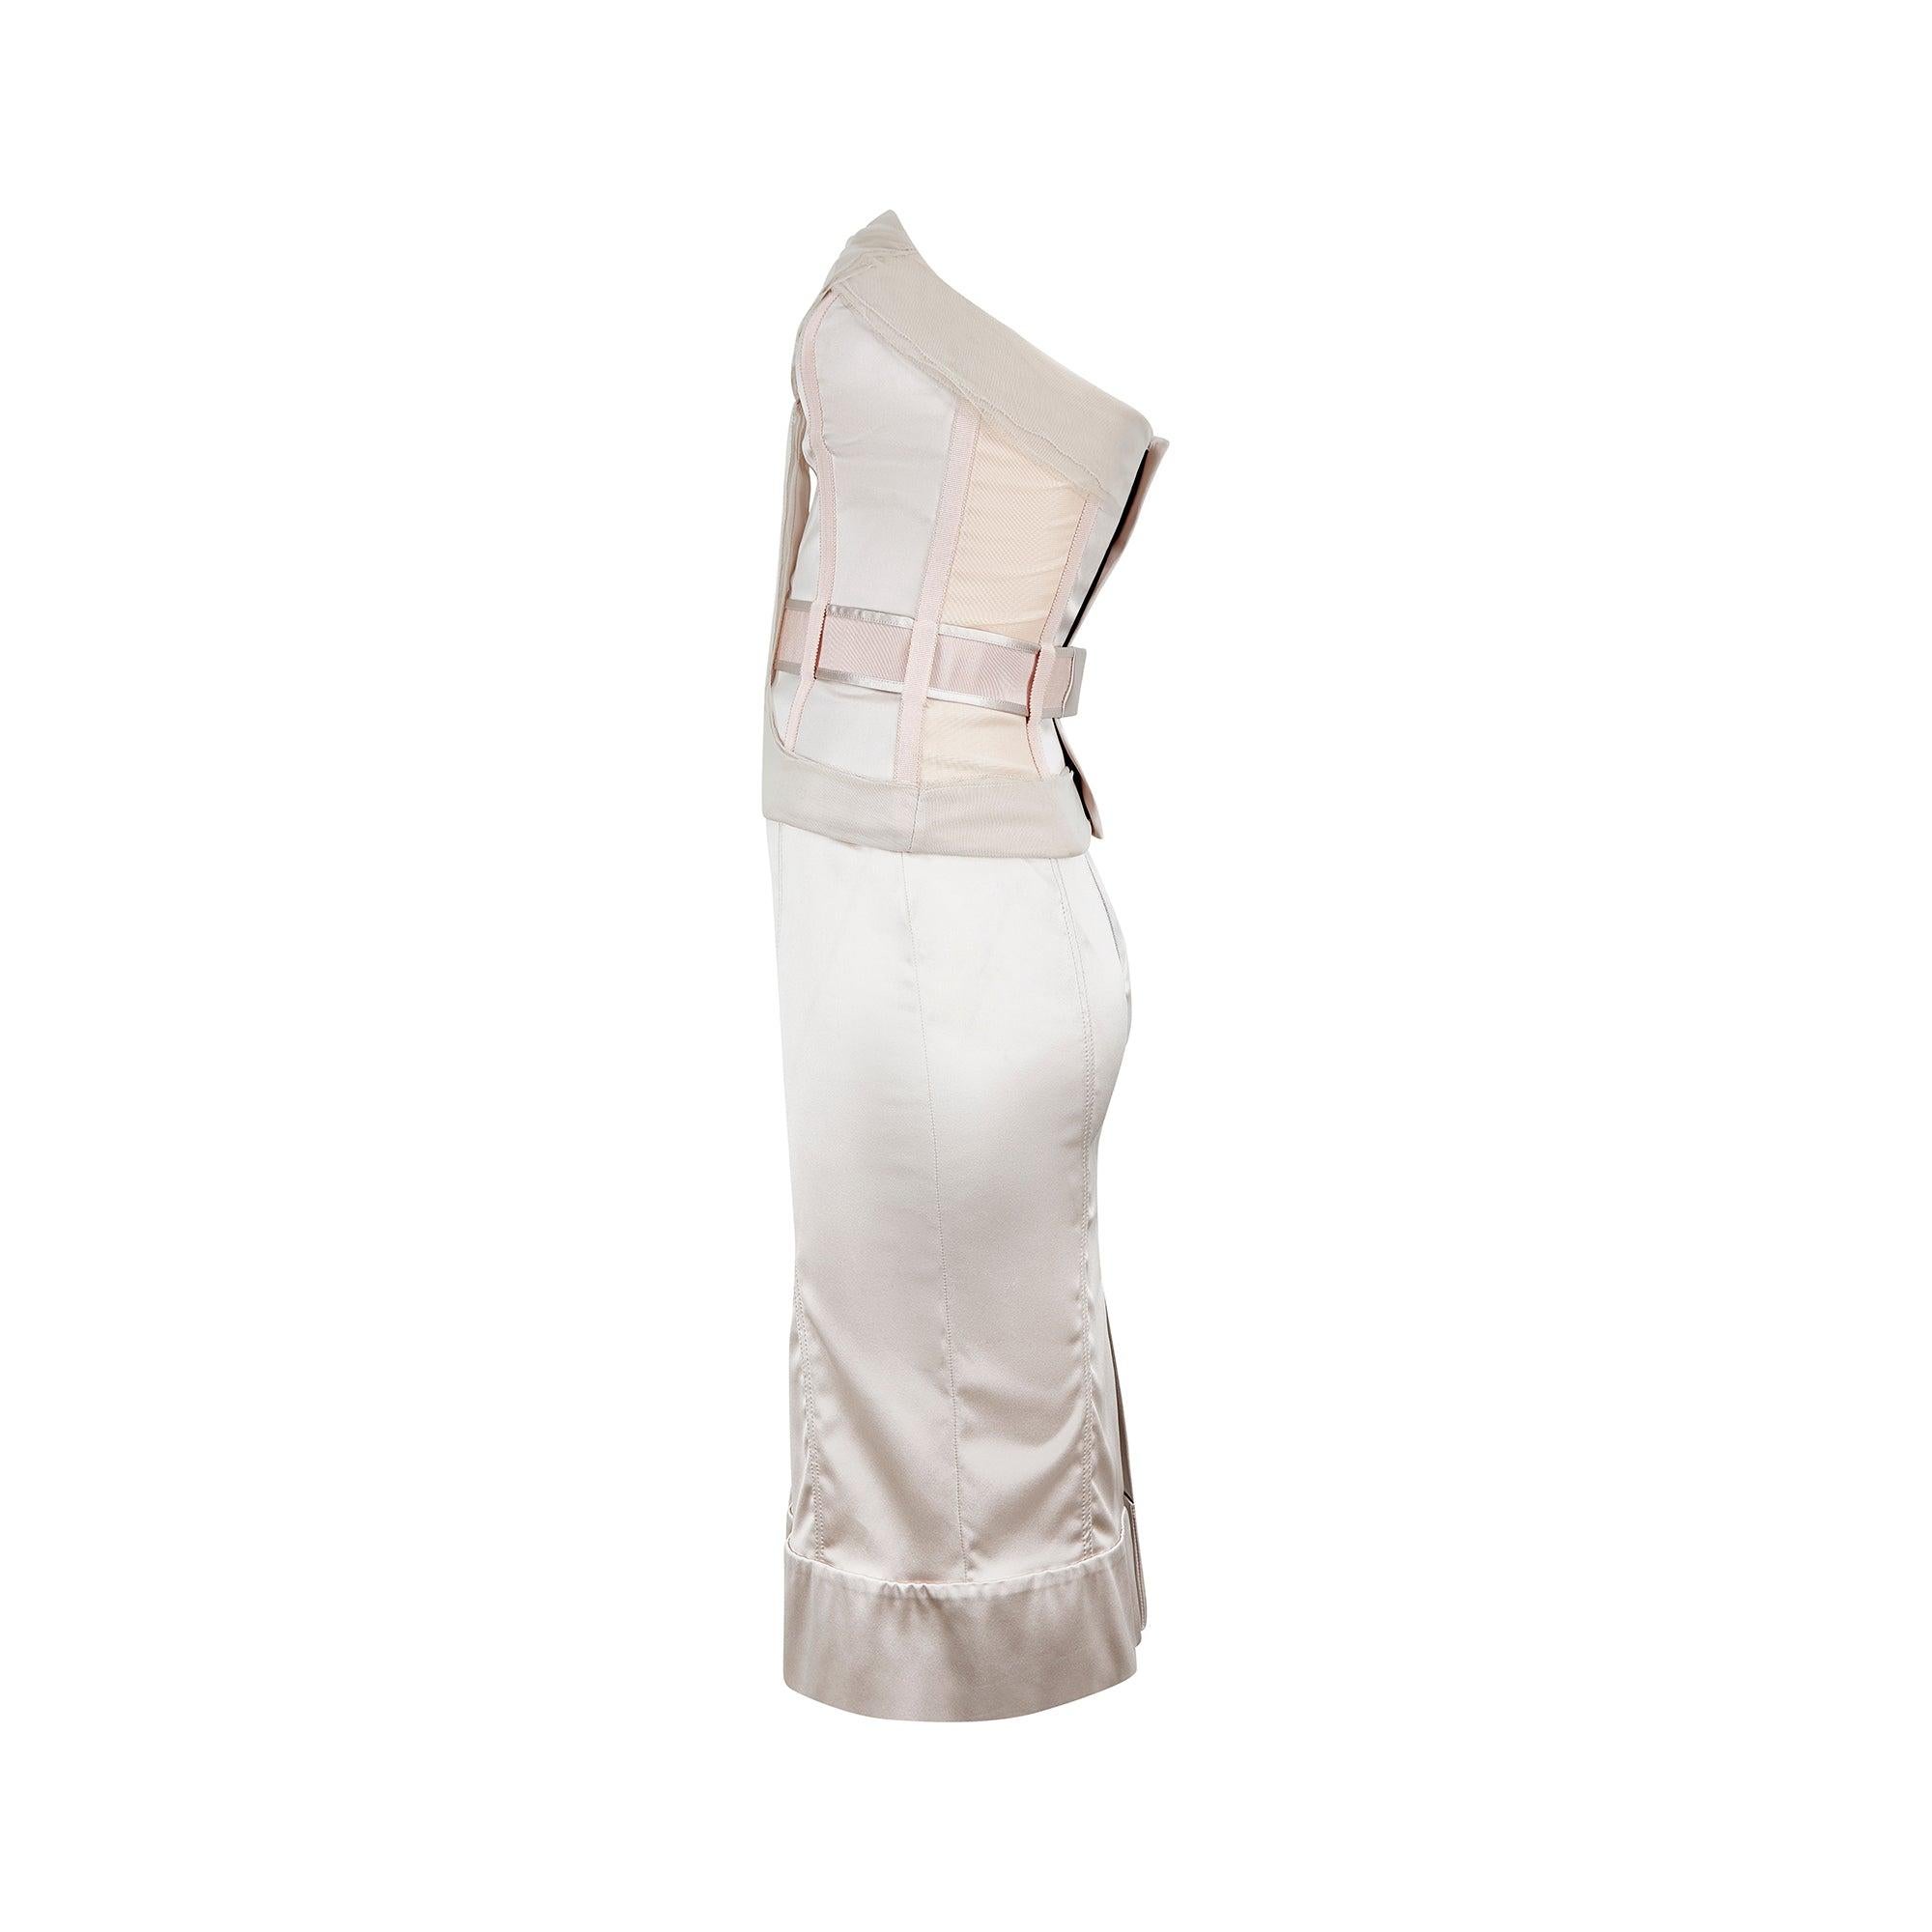 Seen on Kylie Minogue on the cover of the December 2003 issue of British Vogue, this collectable pale 'oyster' pink satin two-piece is by Stella McCartney. The skirt is tight-fitting with a panelled construction and falls to knee length with a thick